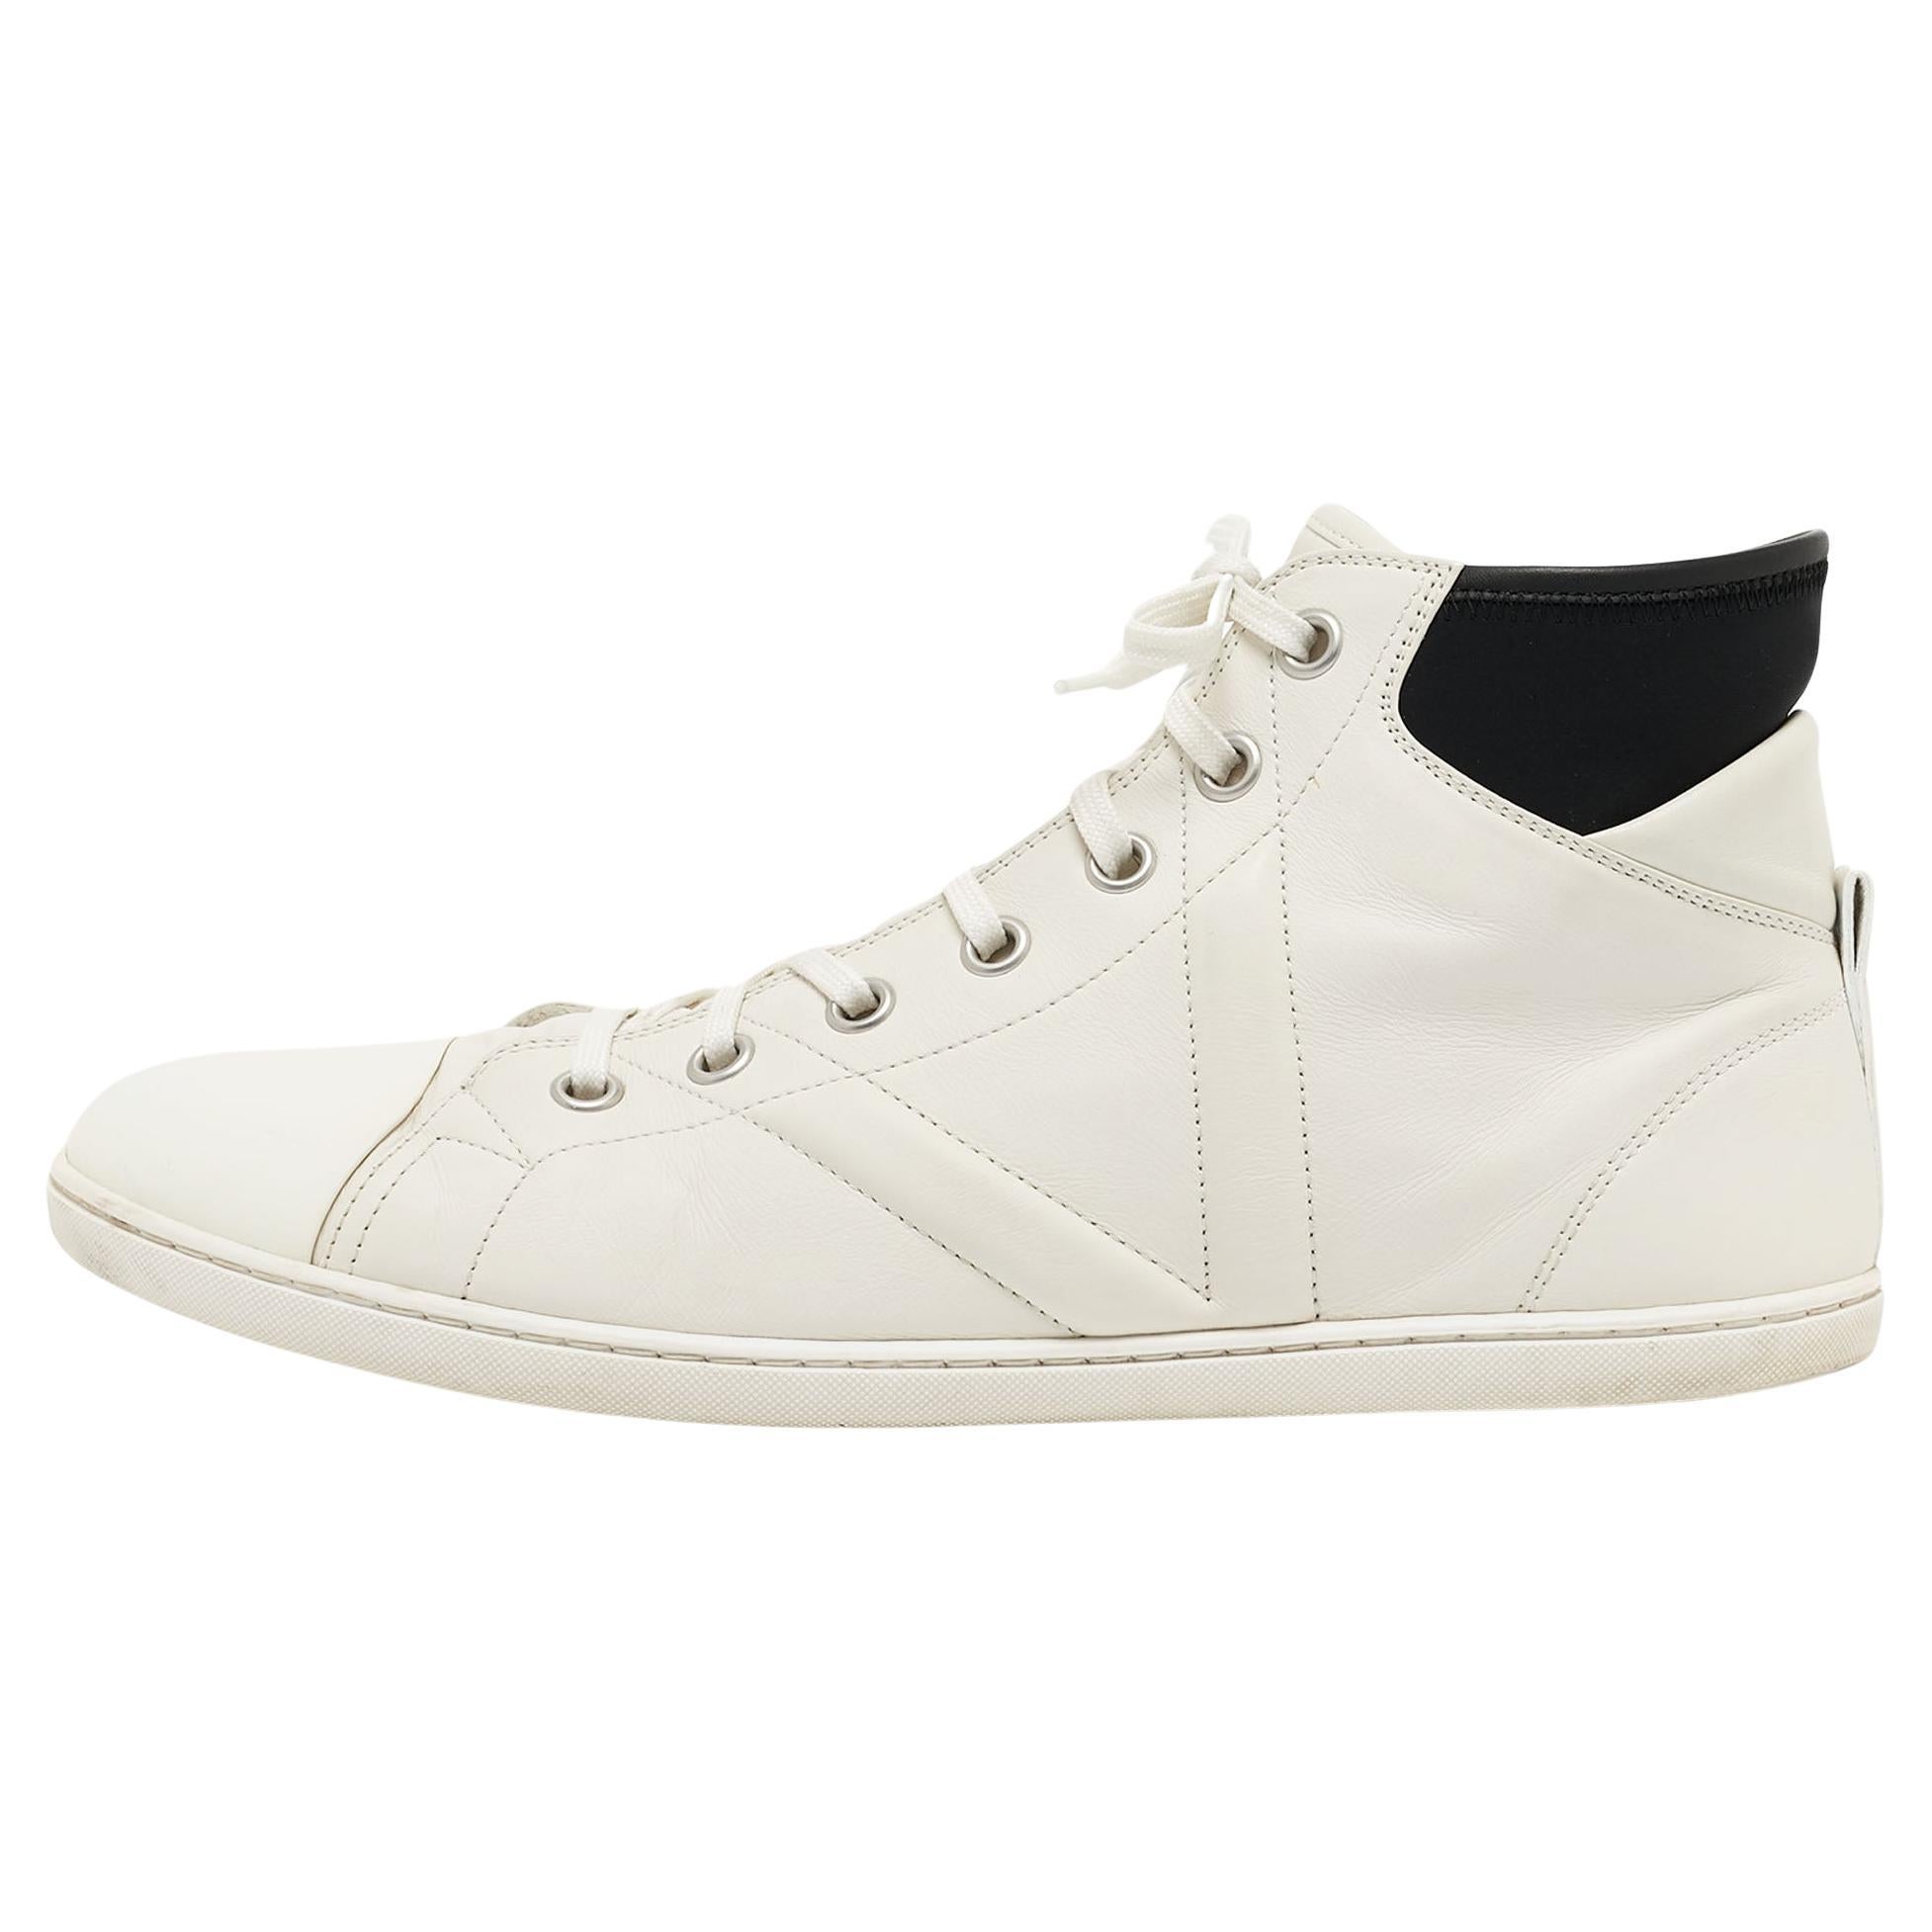 Louis Vuitton White/Black Leather Trainer High Top Sneakers Size 42.5 For Sale